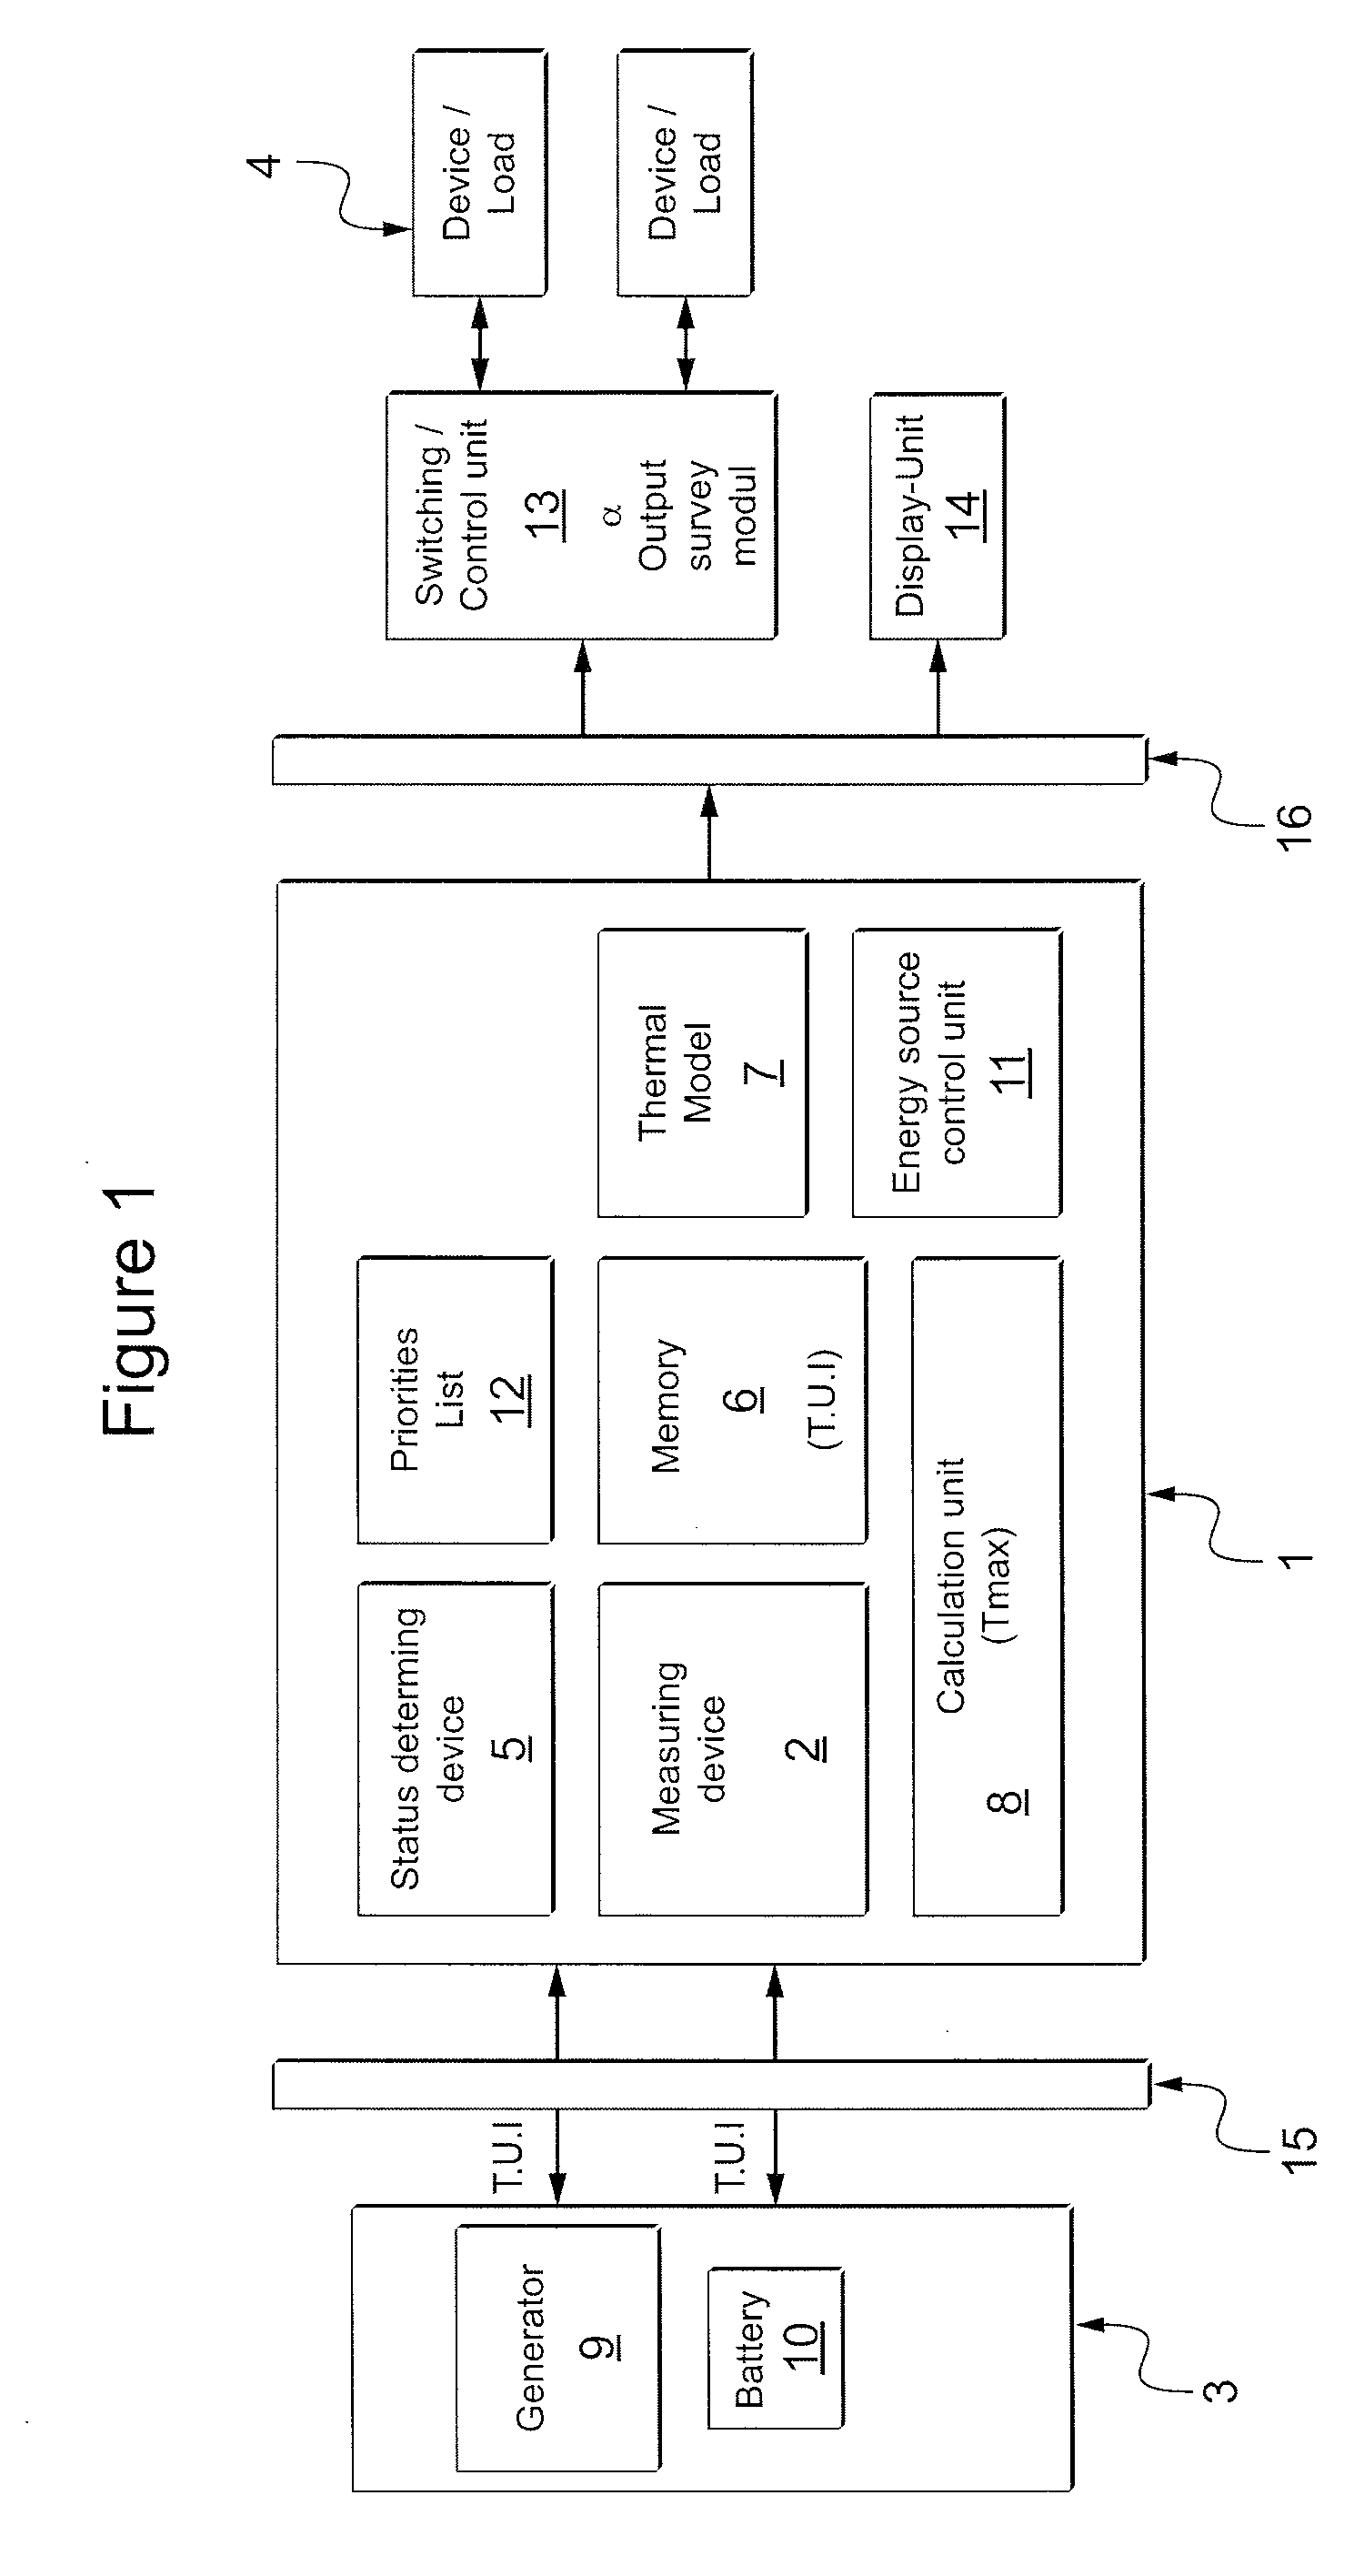 Method and system for an optimized utilization of energy resources of an electrical system